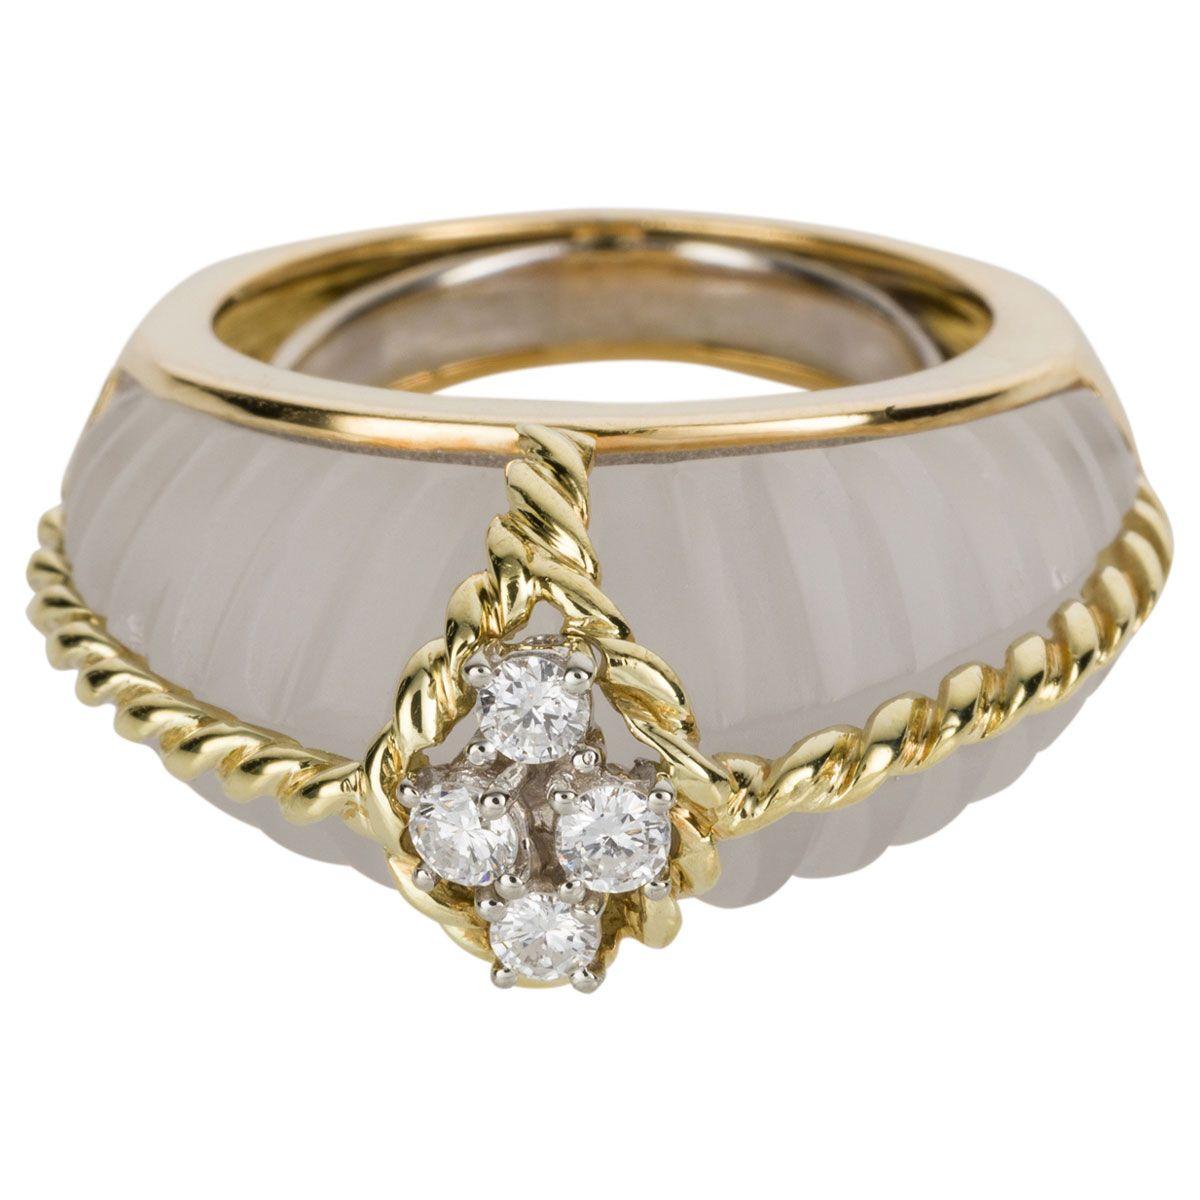 Fred Paris Rock Crystal and Diamond Cocktail Ring